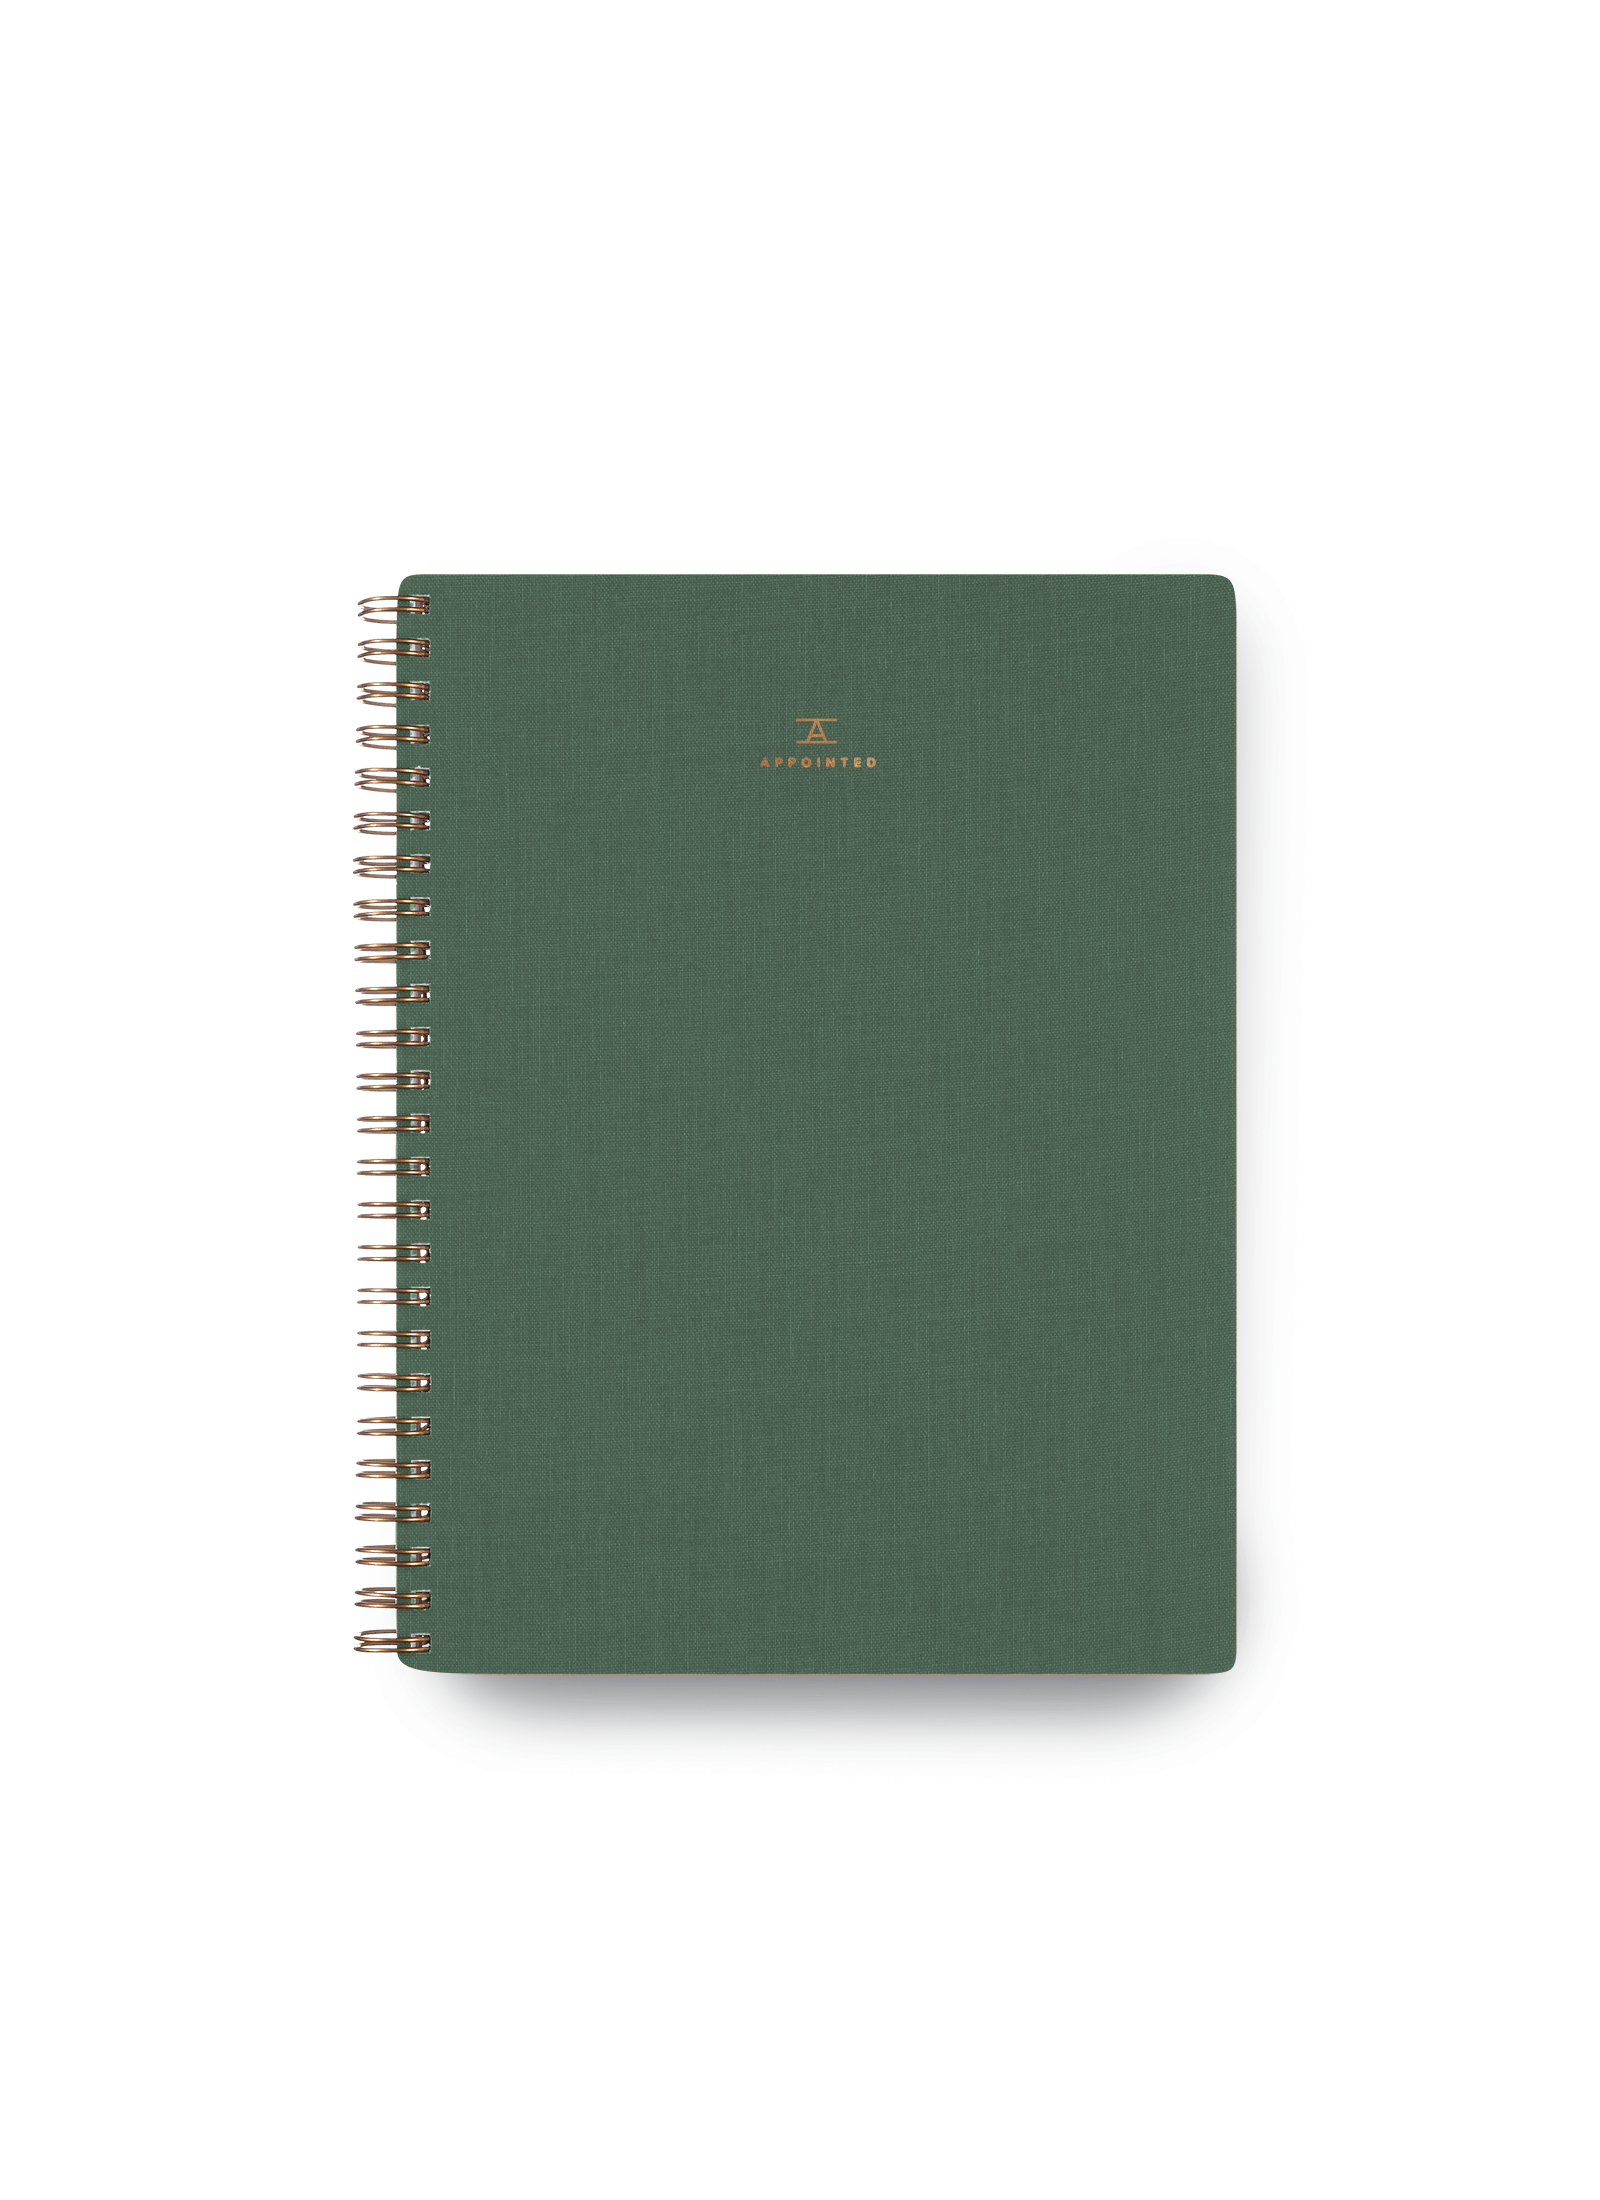 Appointed Workbook in Natural Linen bookcloth with brass wire-o binding front cover || Fern Green